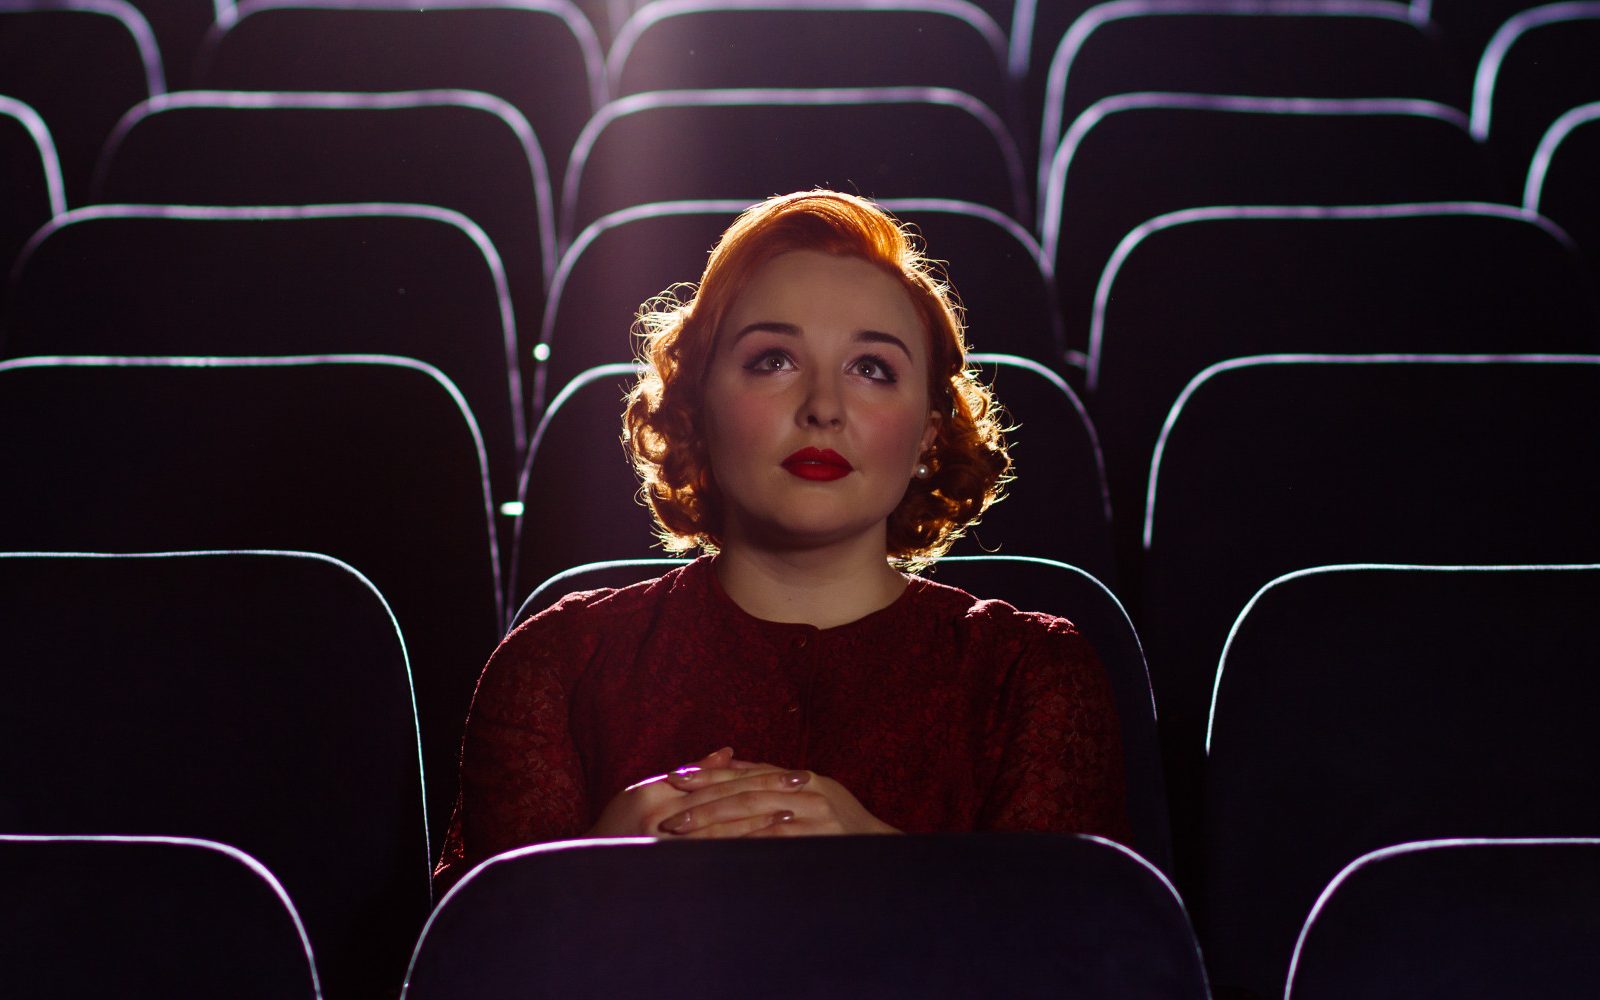 Hey, We Bet You Can’t Get Better Than 80% On This Random Knowledge Quiz Woman watching movie alone in cinema